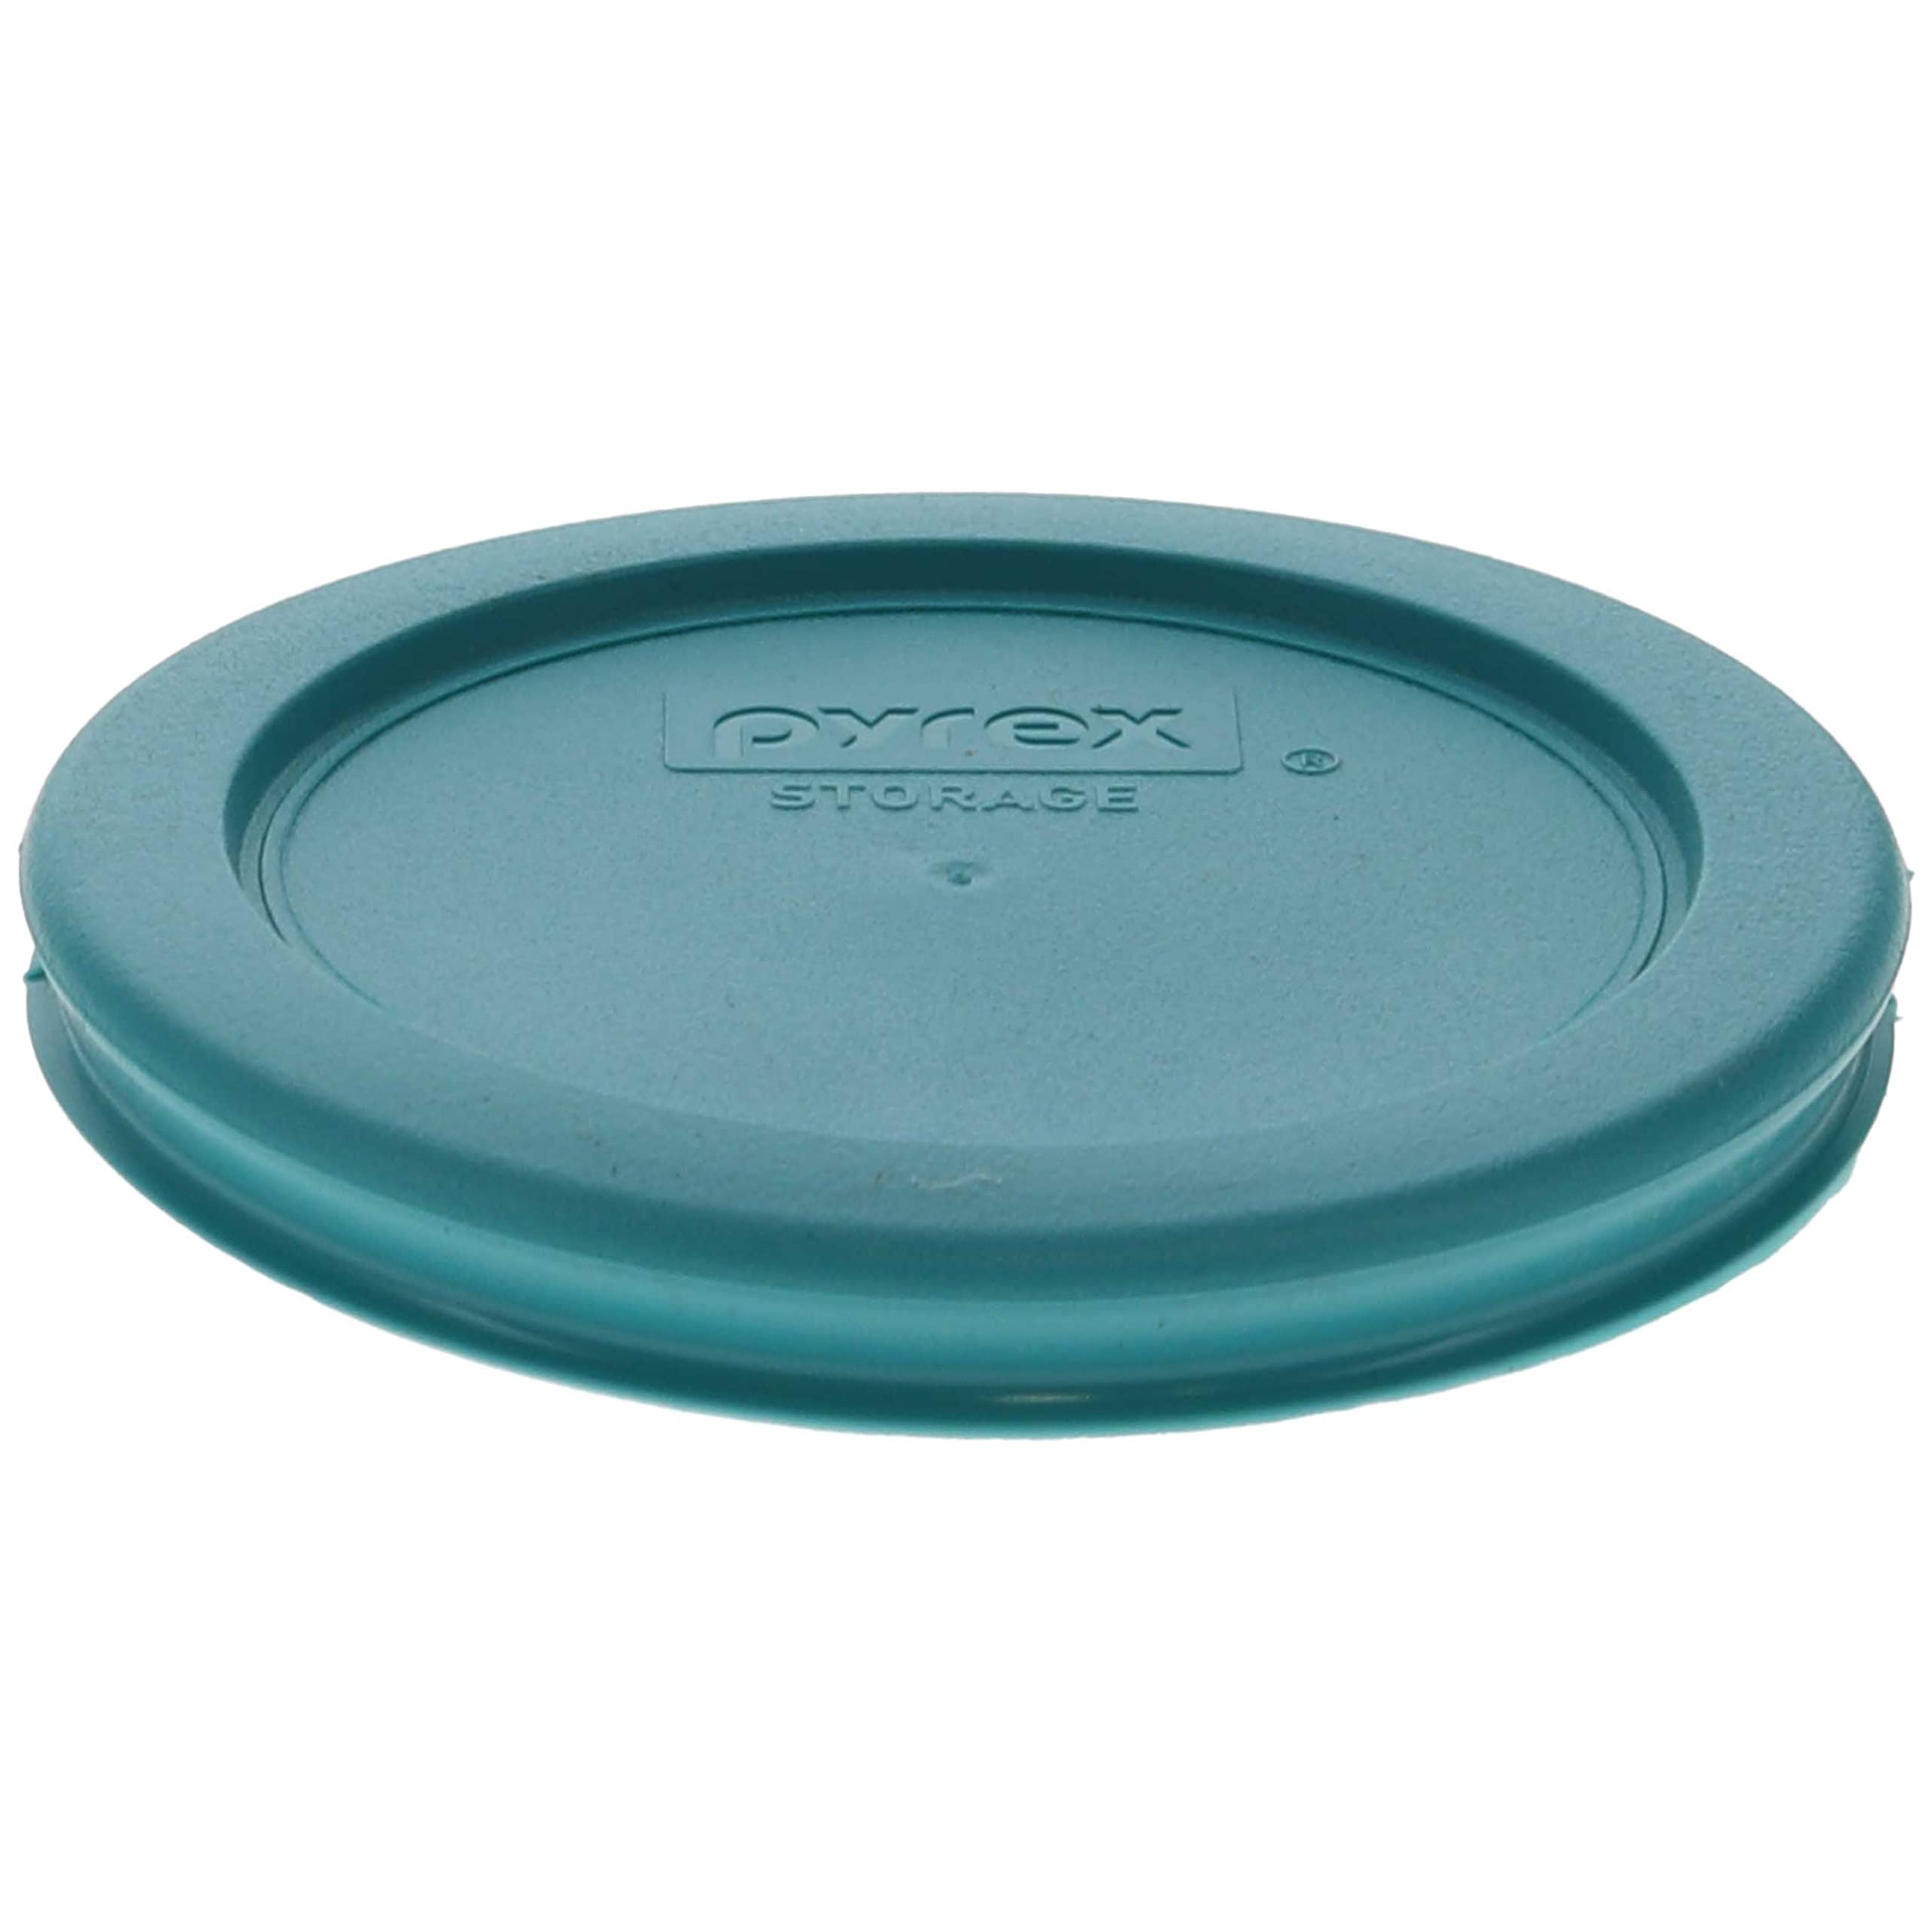 Pyrex 7202-PC 1-Cup Turquoise Round Plastic Food Storage Replacement Lid, Made in USA - 2 Pack